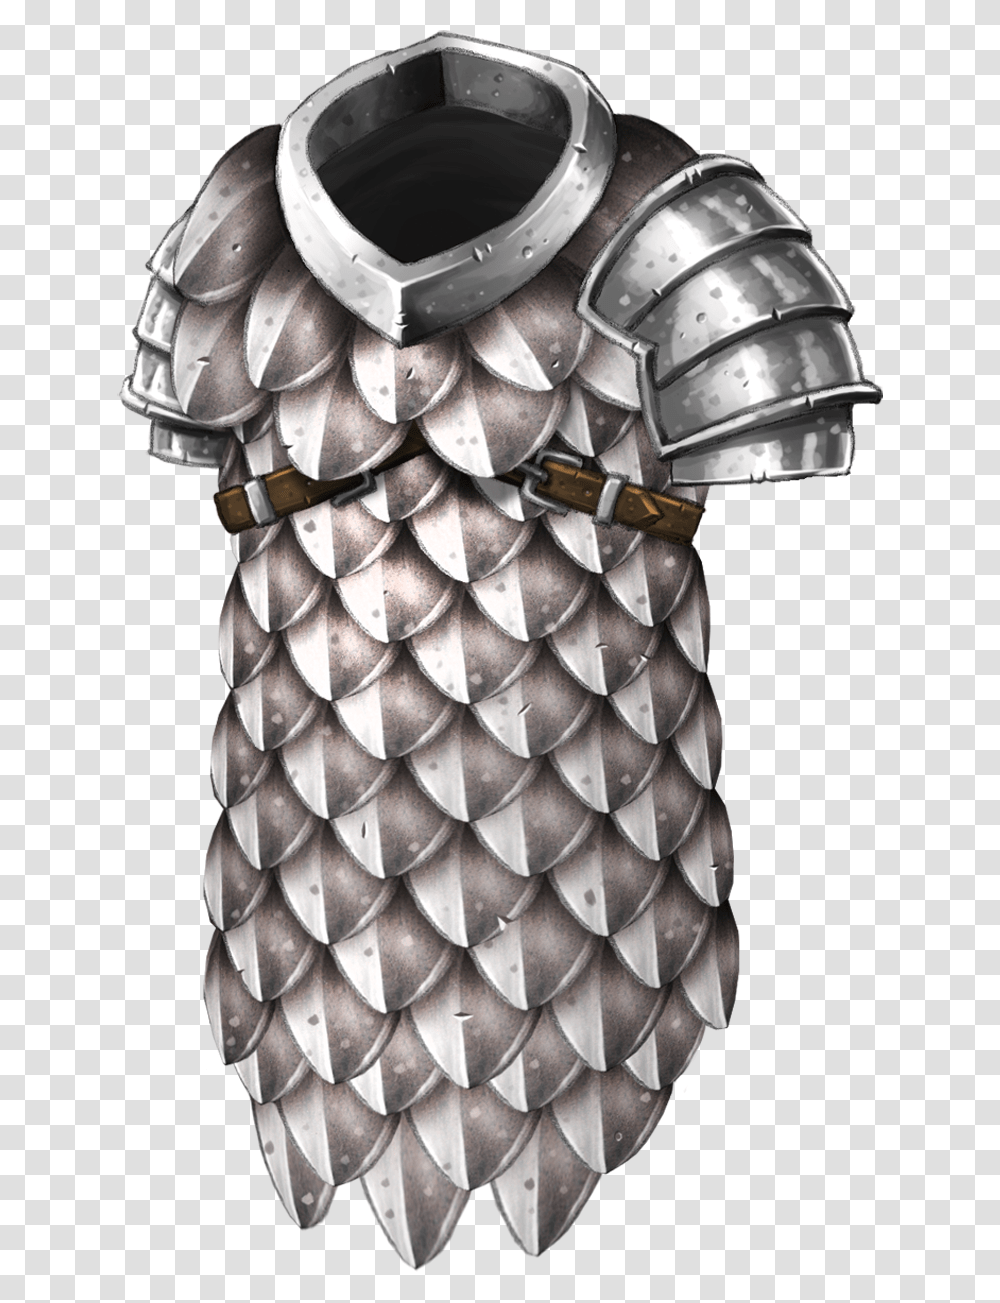 Clip Art Fish Scale Armor Dampd Scale Mail Armor, Helmet, Apparel, Chain Mail Transparent Png